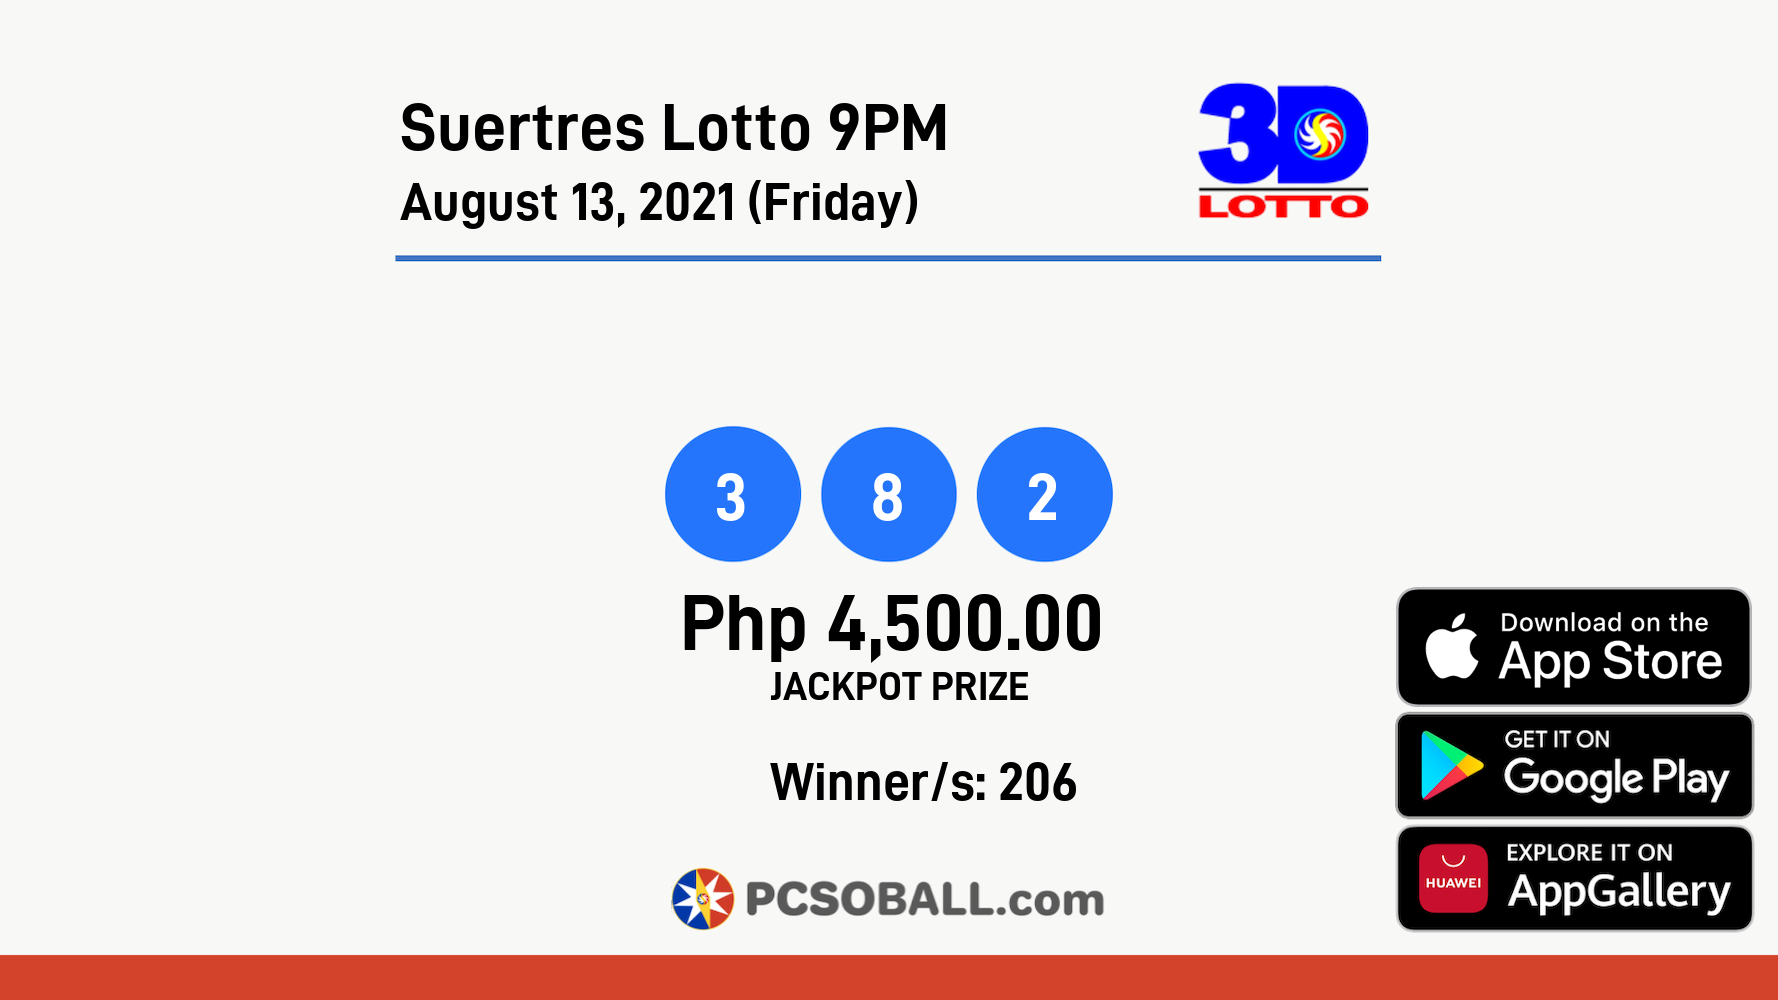 Suertres Lotto 9PM August 13, 2021 (Friday) Result